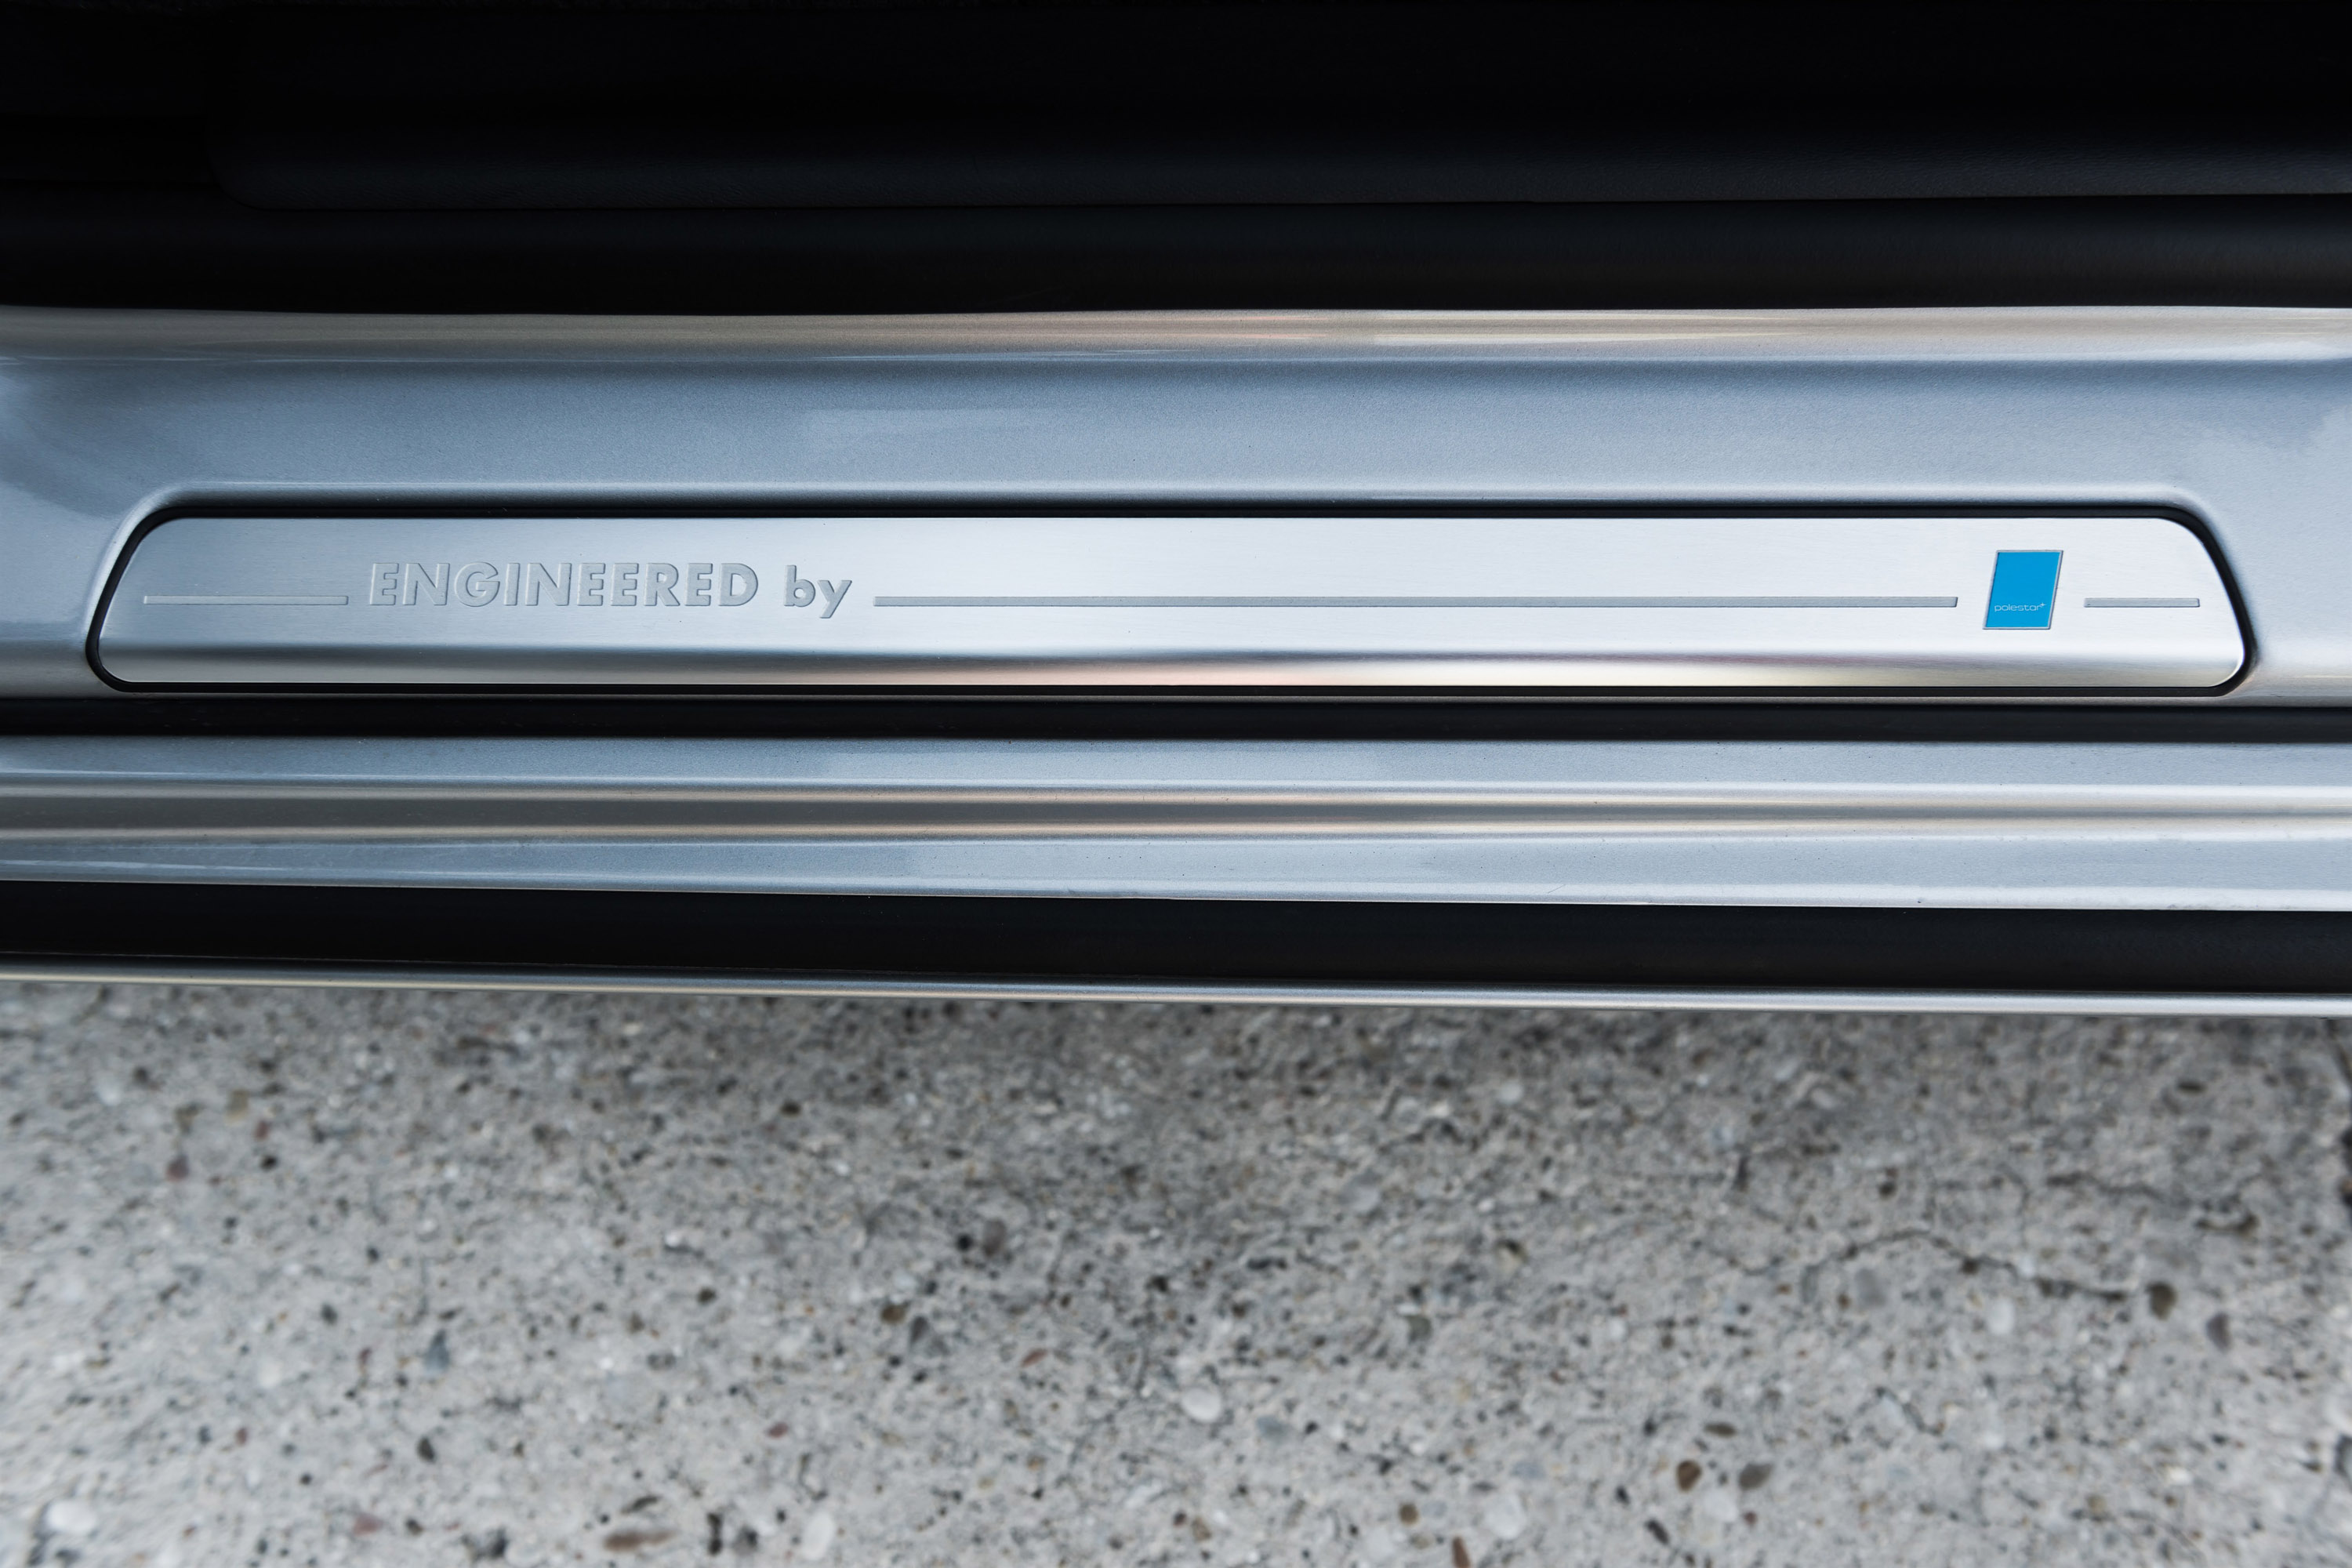 POLESTAR PERFORMANCE PARTS FOR VOLVO CARS